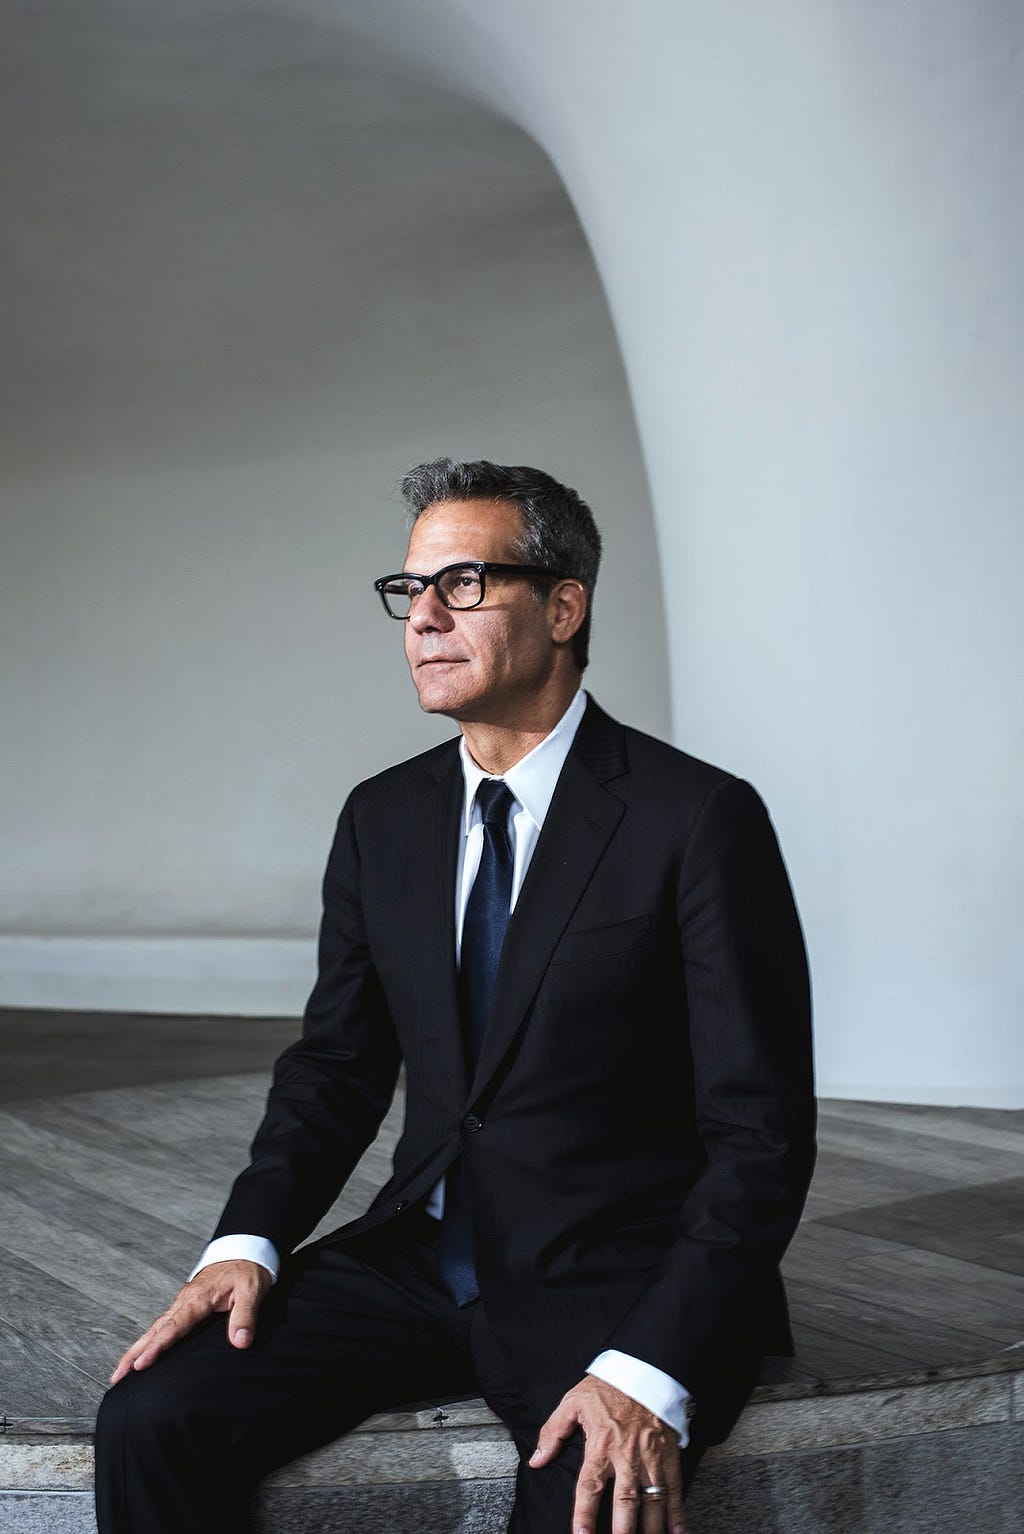 Image of man with glasses sitting in a suit